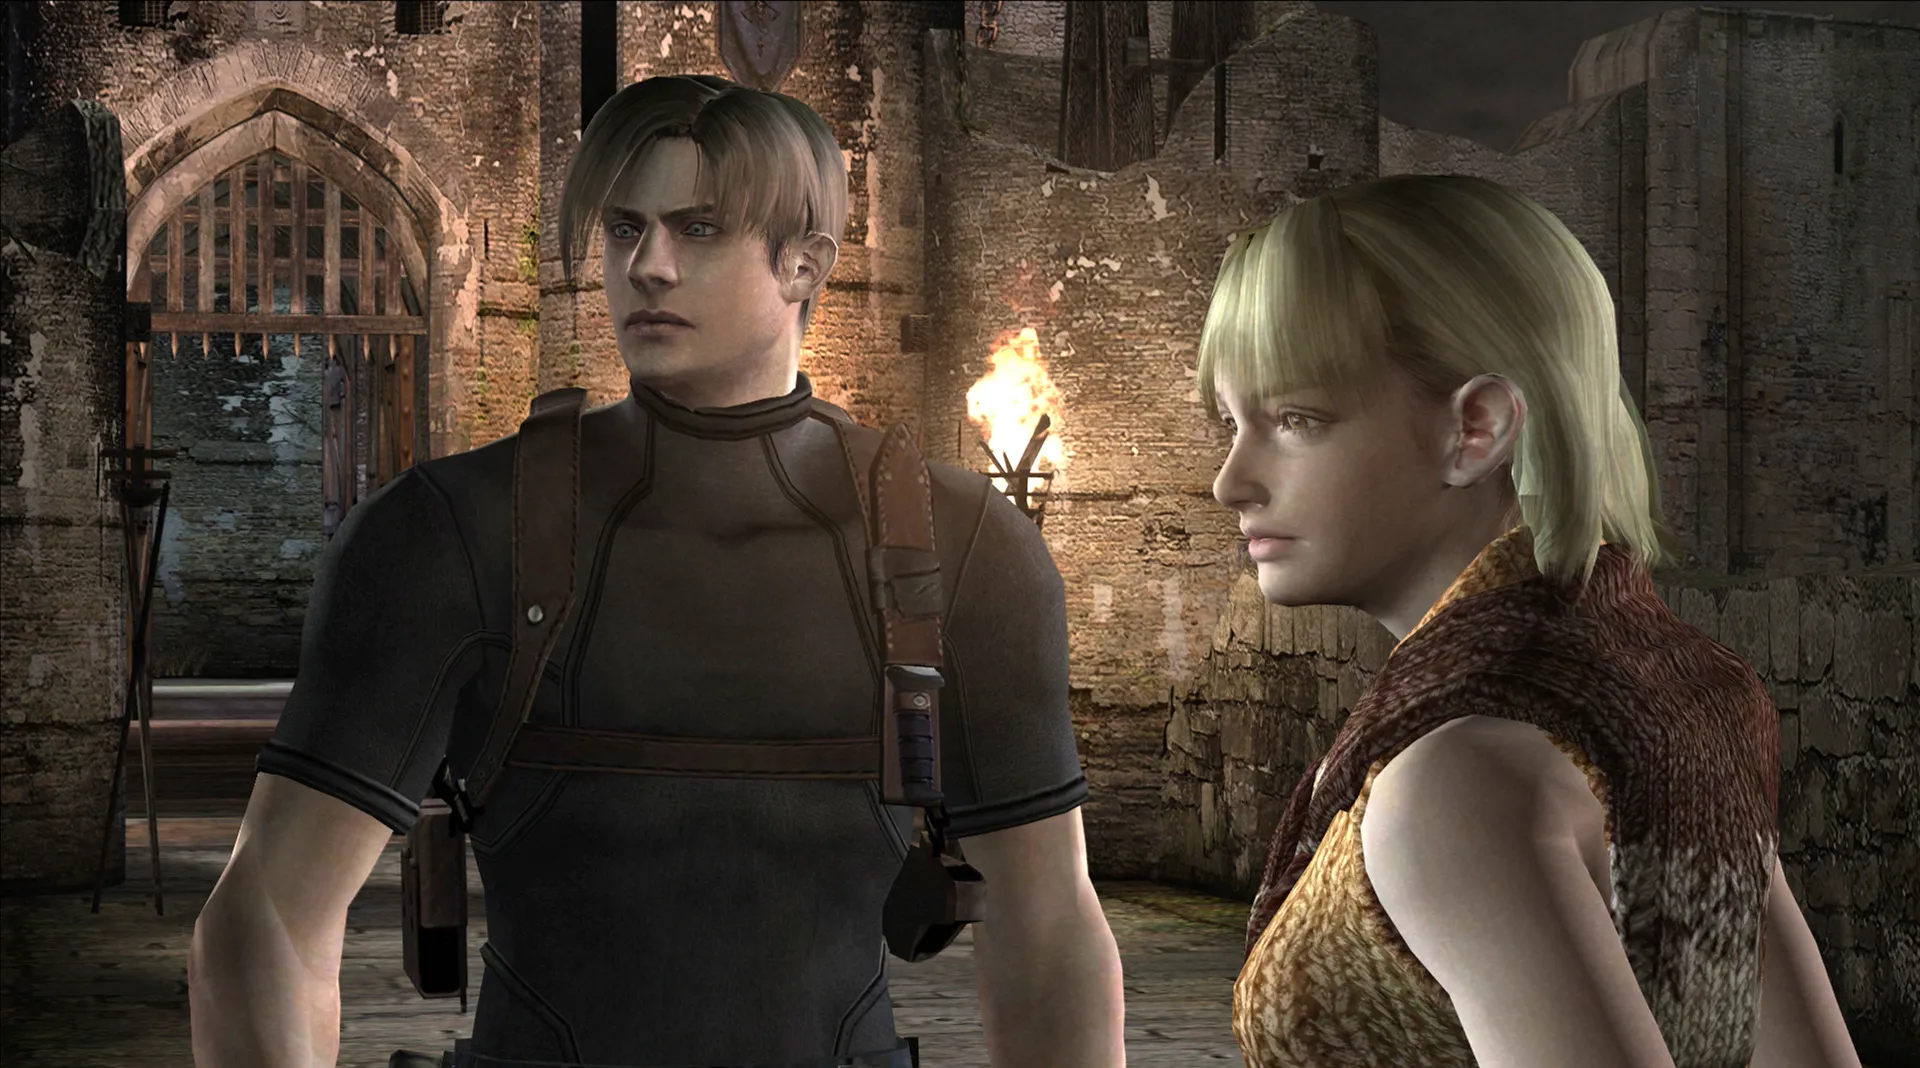 Resident Evil Remake is a bad game by today's standards and that's a  problem